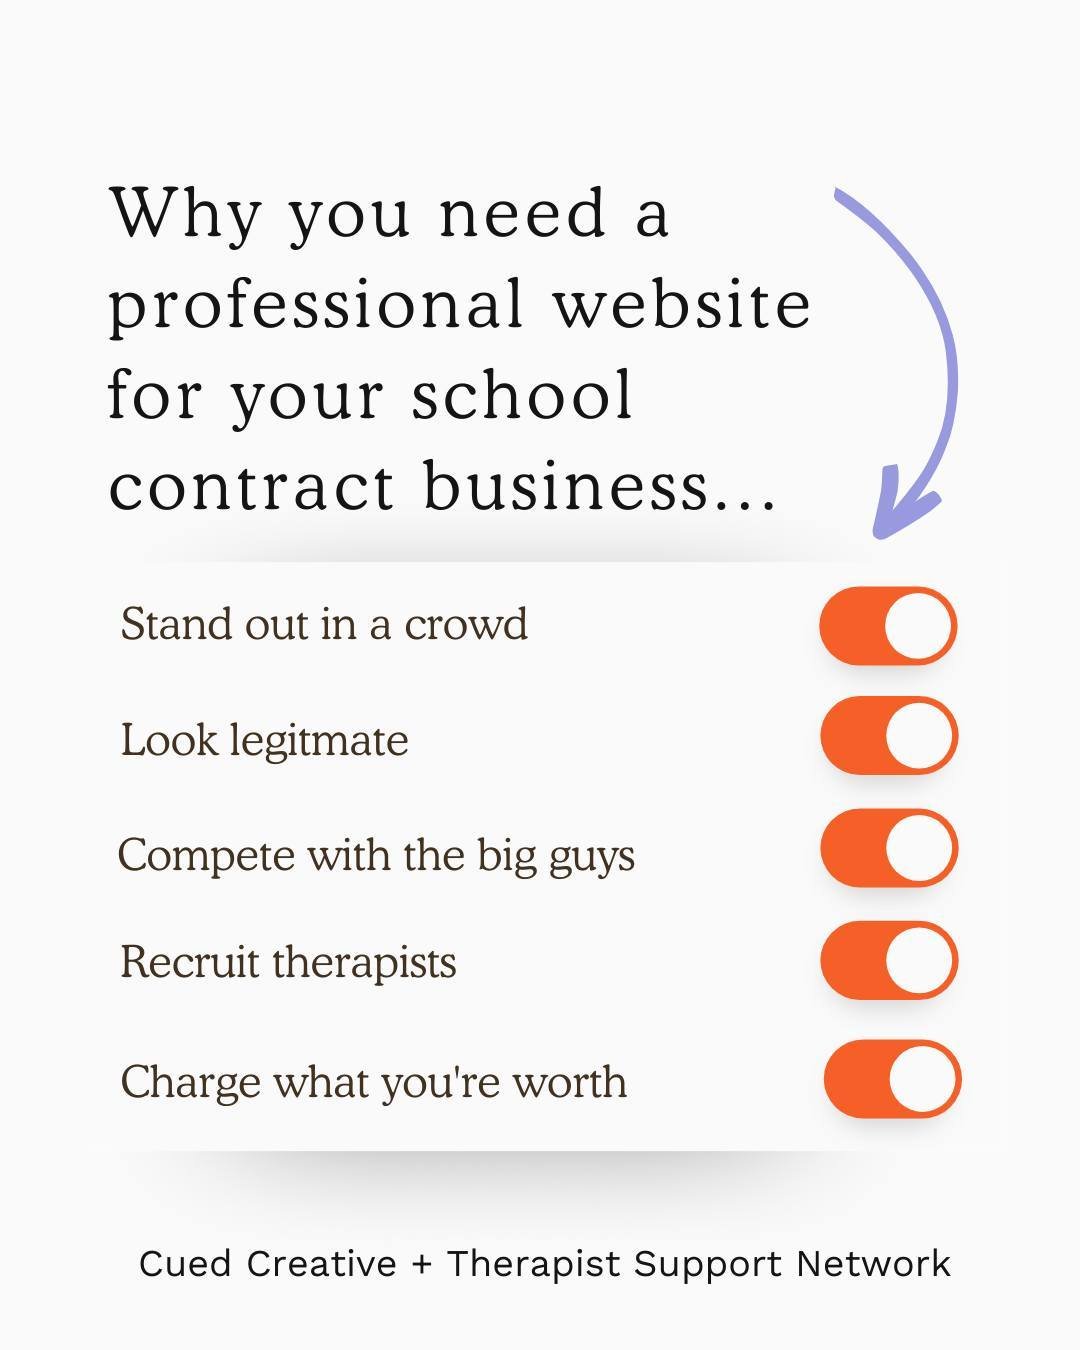 If you run a school contract business or offer contact services as part of your private practice...your website matters!

We now have school contract pages on every template...which means your website is ready to help you promote your school contract